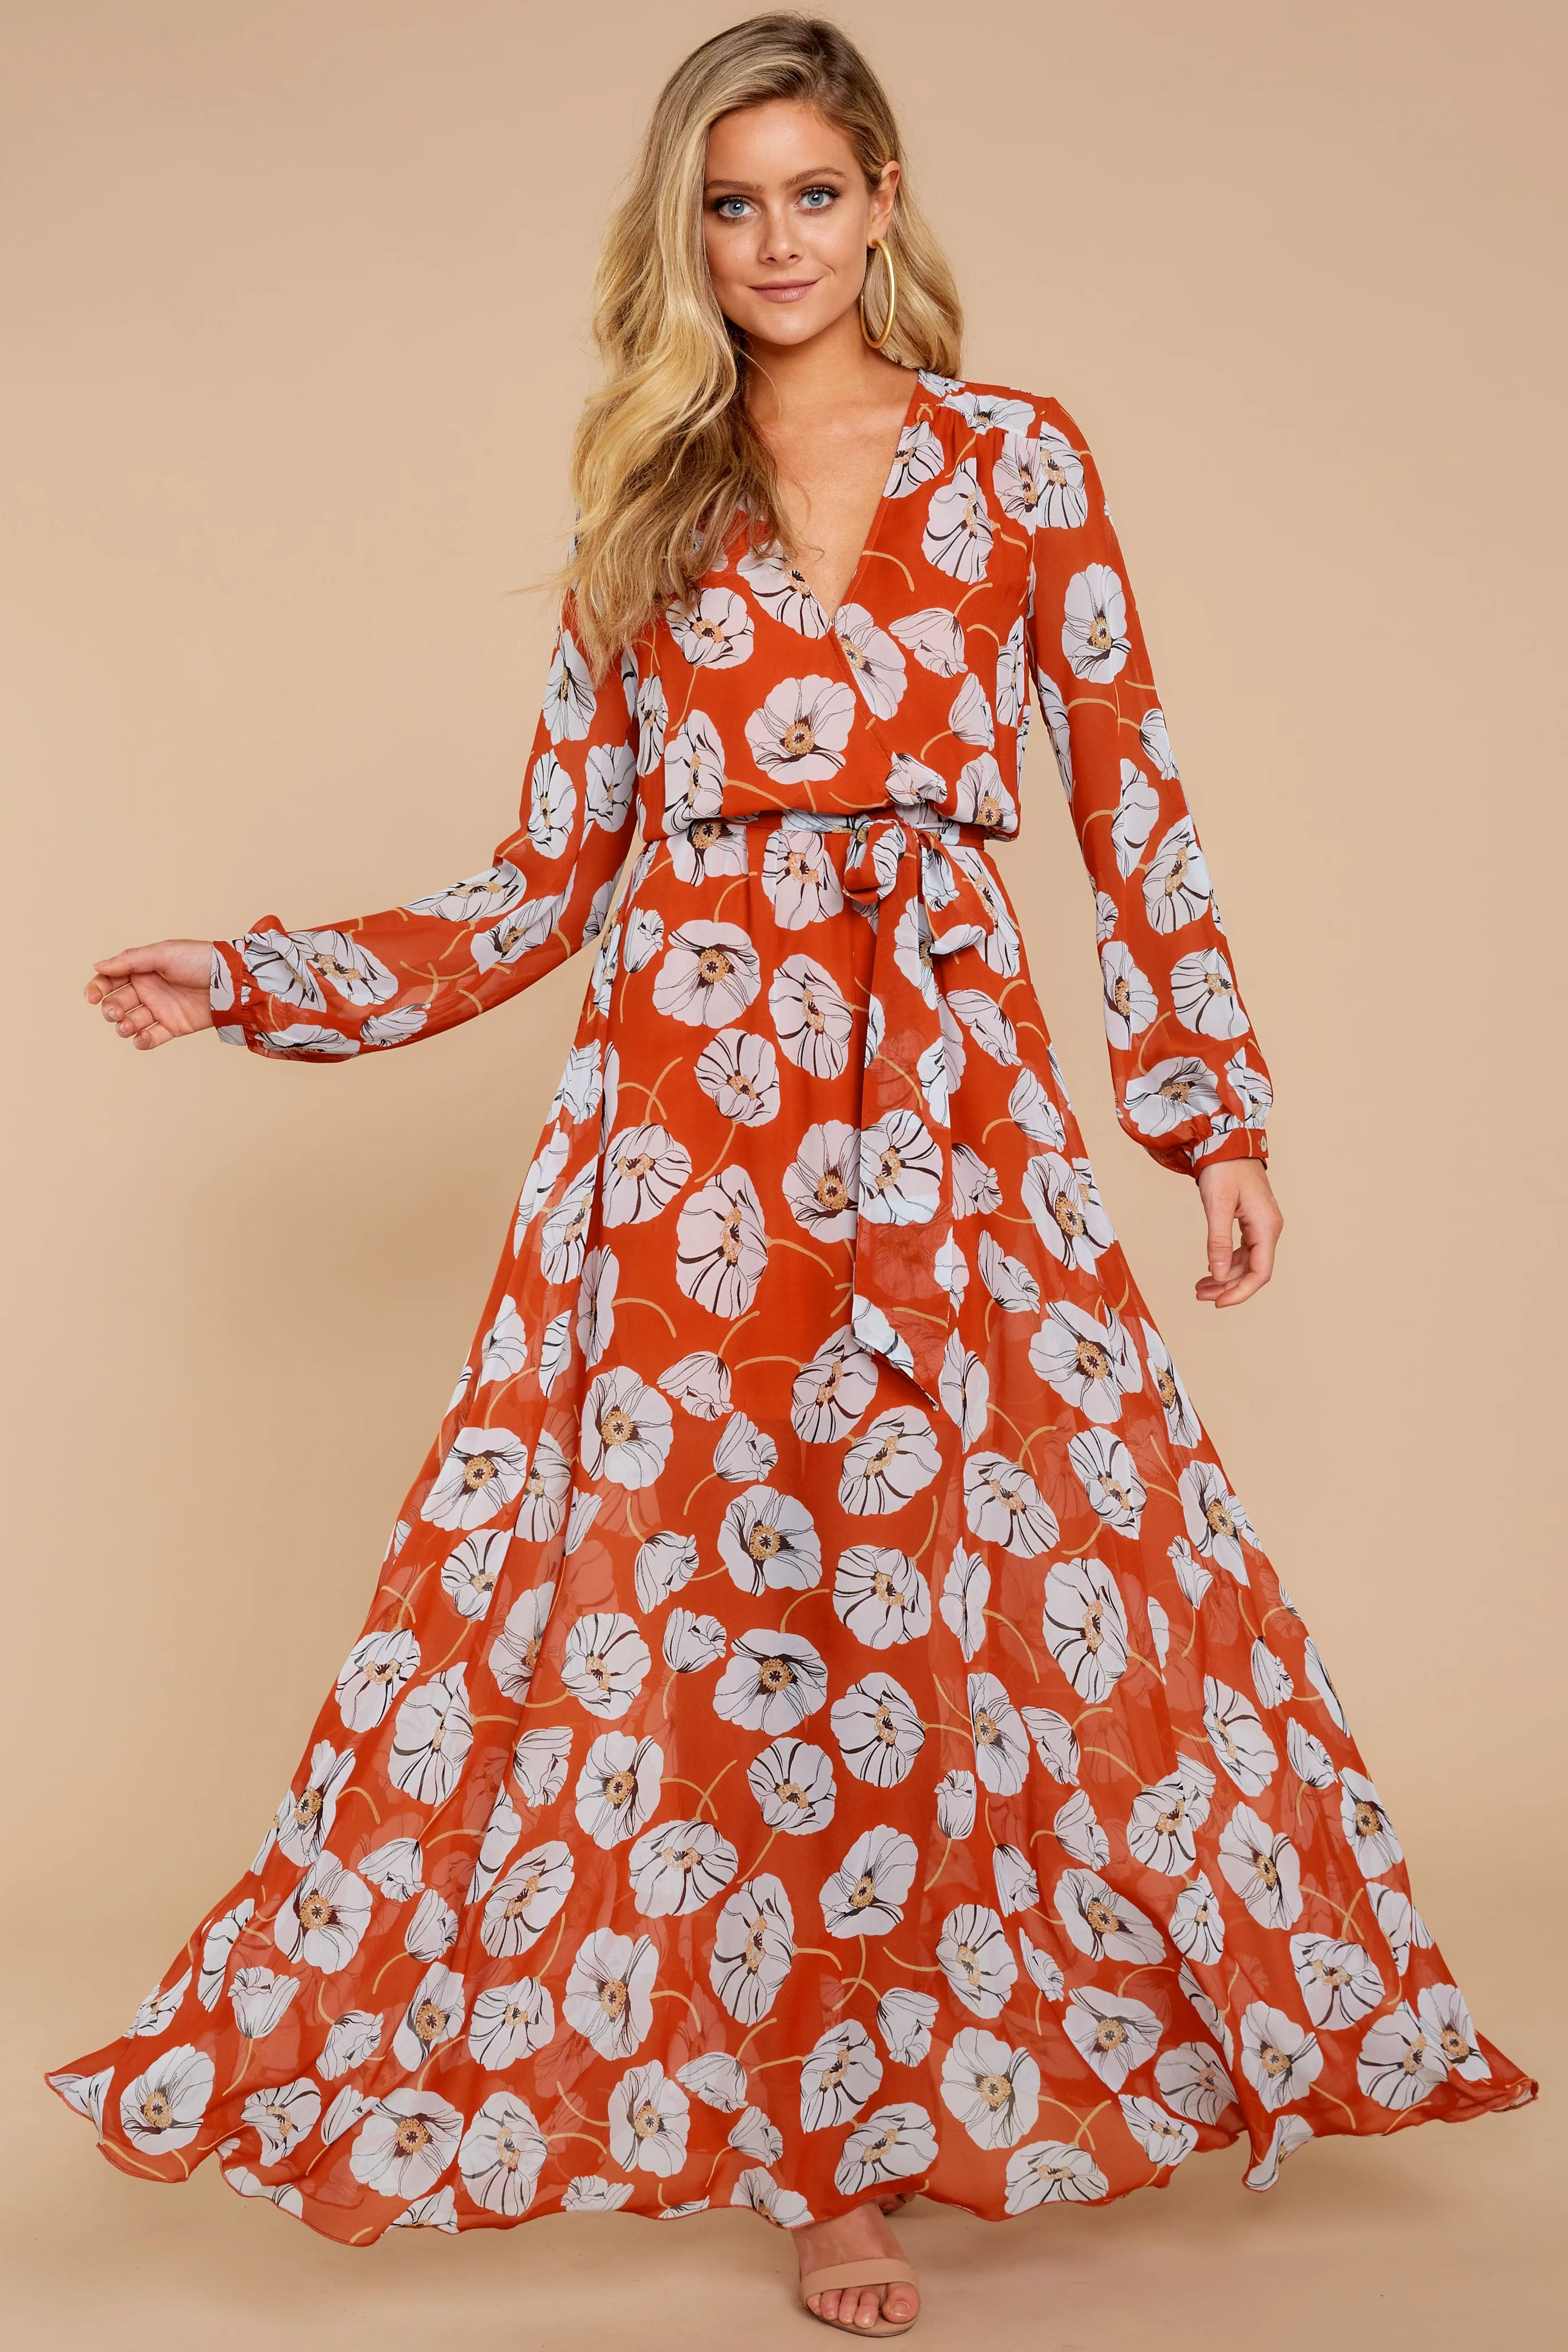 Going To Be Iconic Orange Floral Print Maxi Dress | Red Dress 